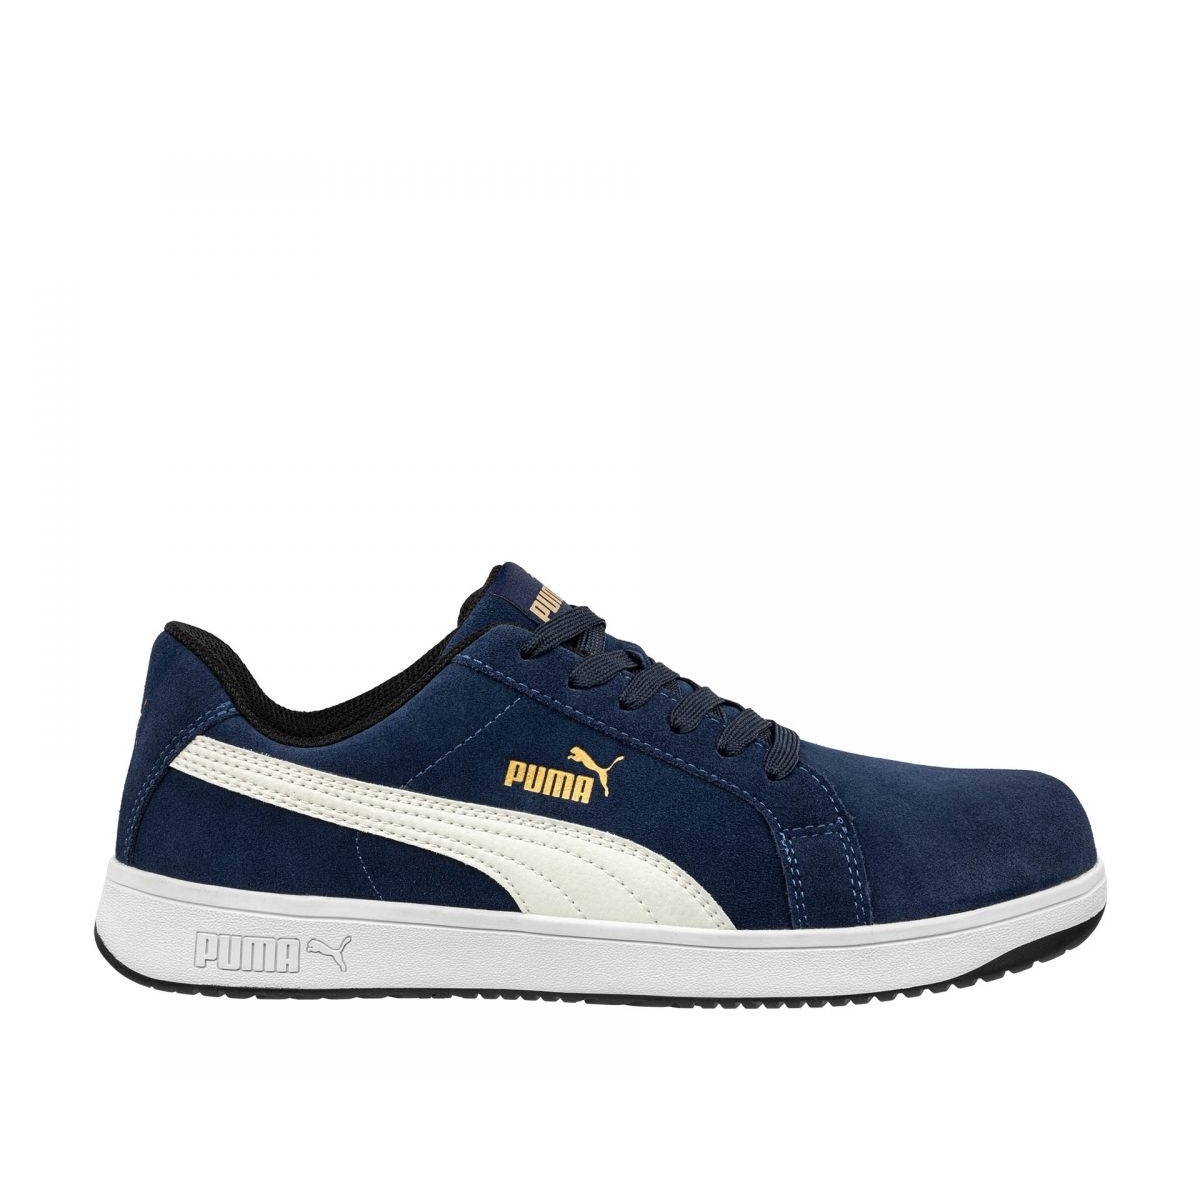 PUMA Safety Men's Iconic Low Composite Toe EH Work Shoes Navy Suede - 640025 ONE SIZE Navy - Navy, 10.5